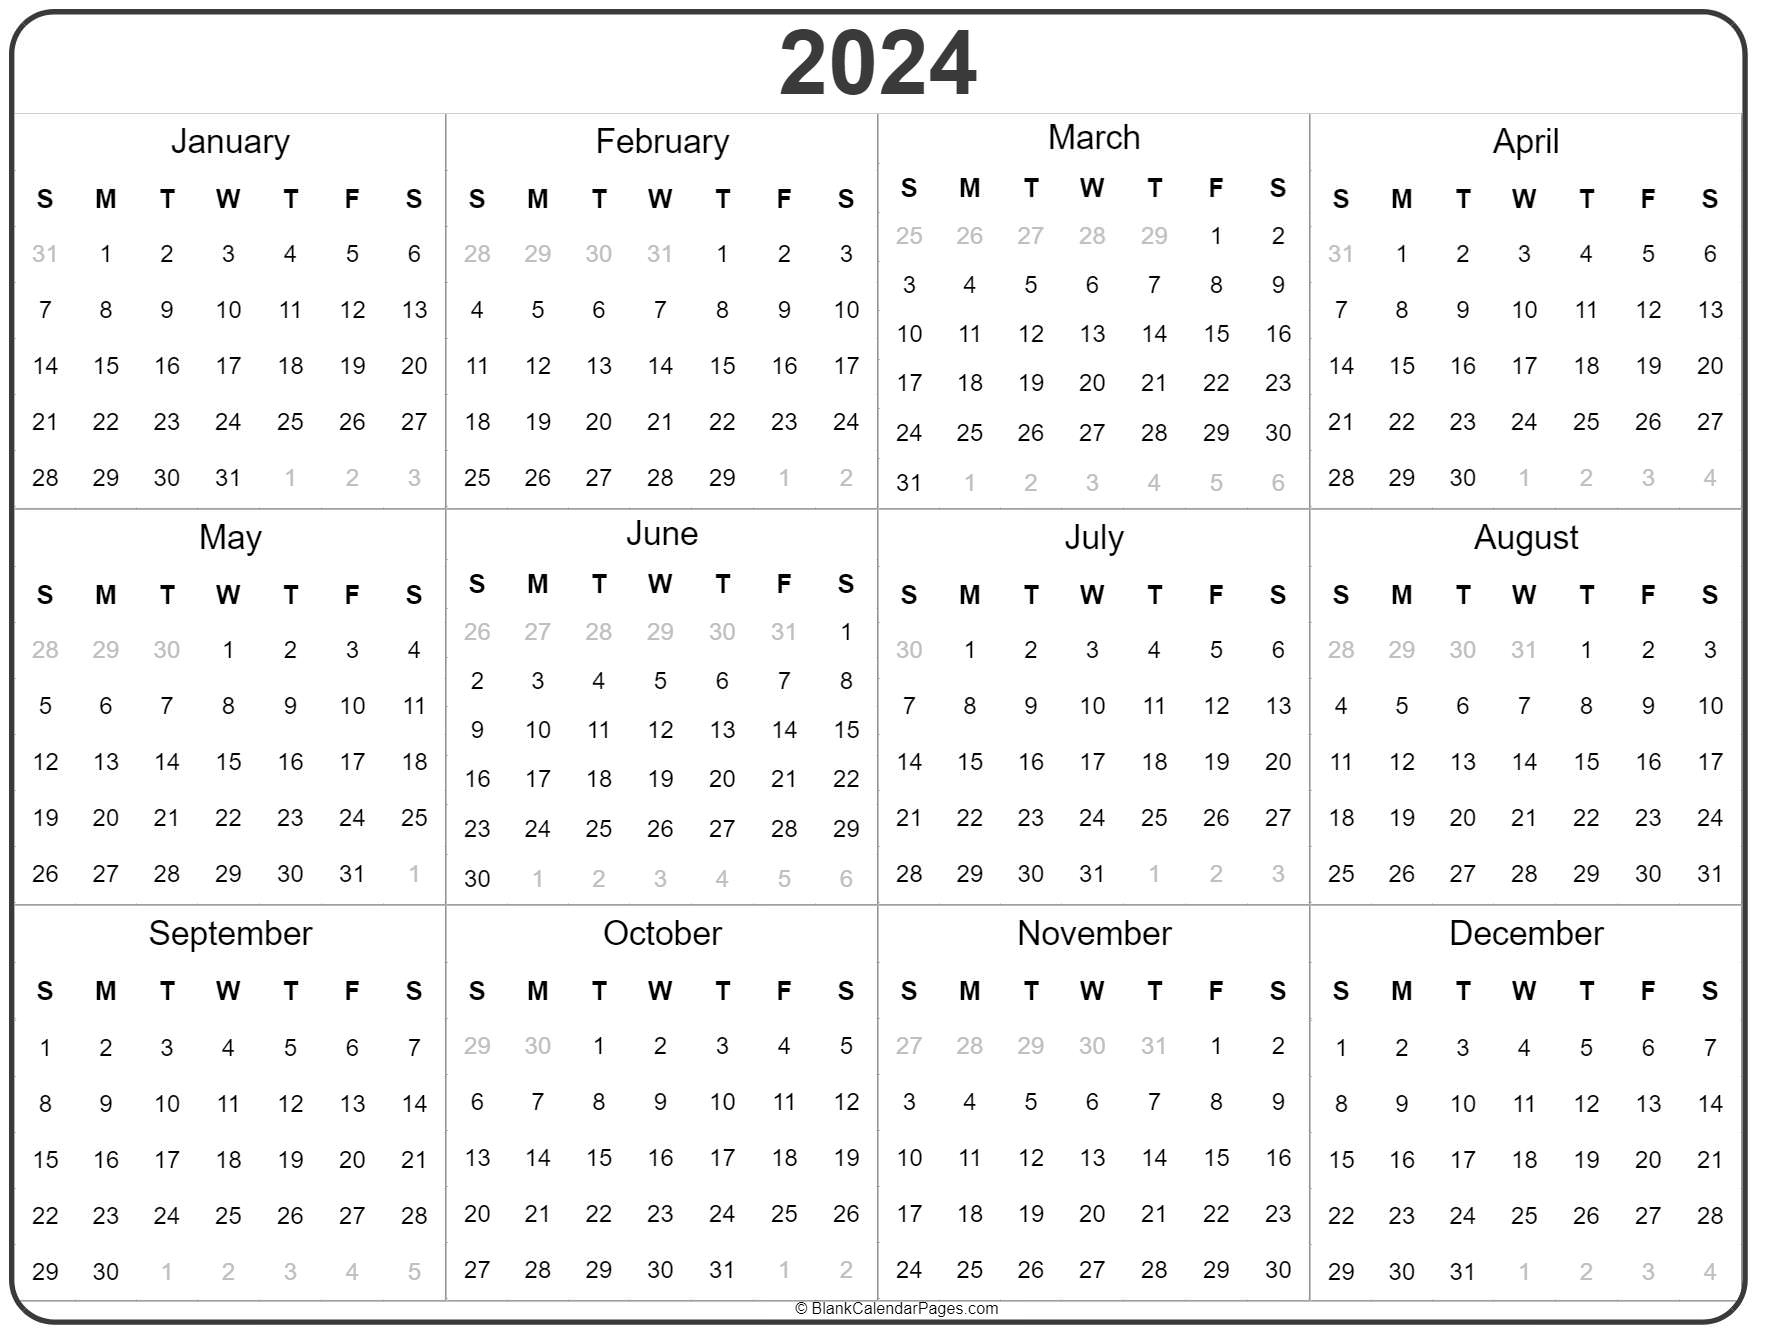 2024 Year Calendar | Yearly Printable | 2024 Yearly Calendar At A Glance